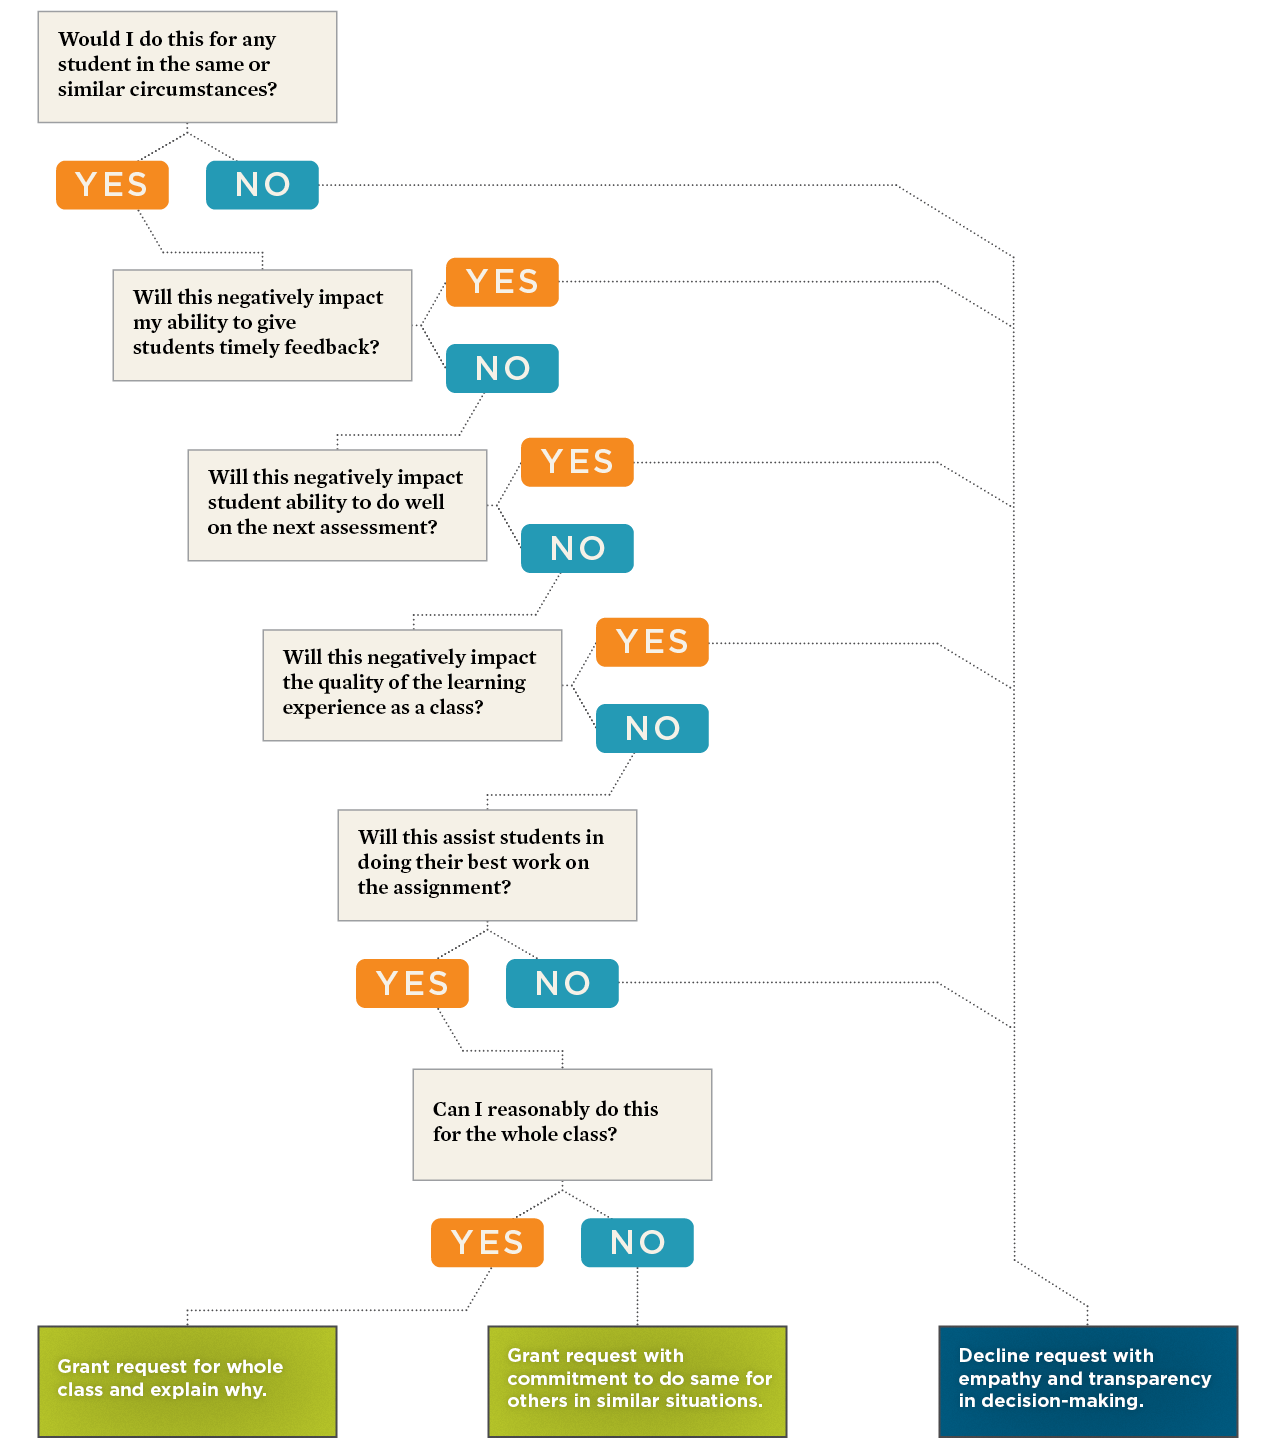 A graphic representing a decision tree for addressing student requests for flexibility on due dates and class policies.